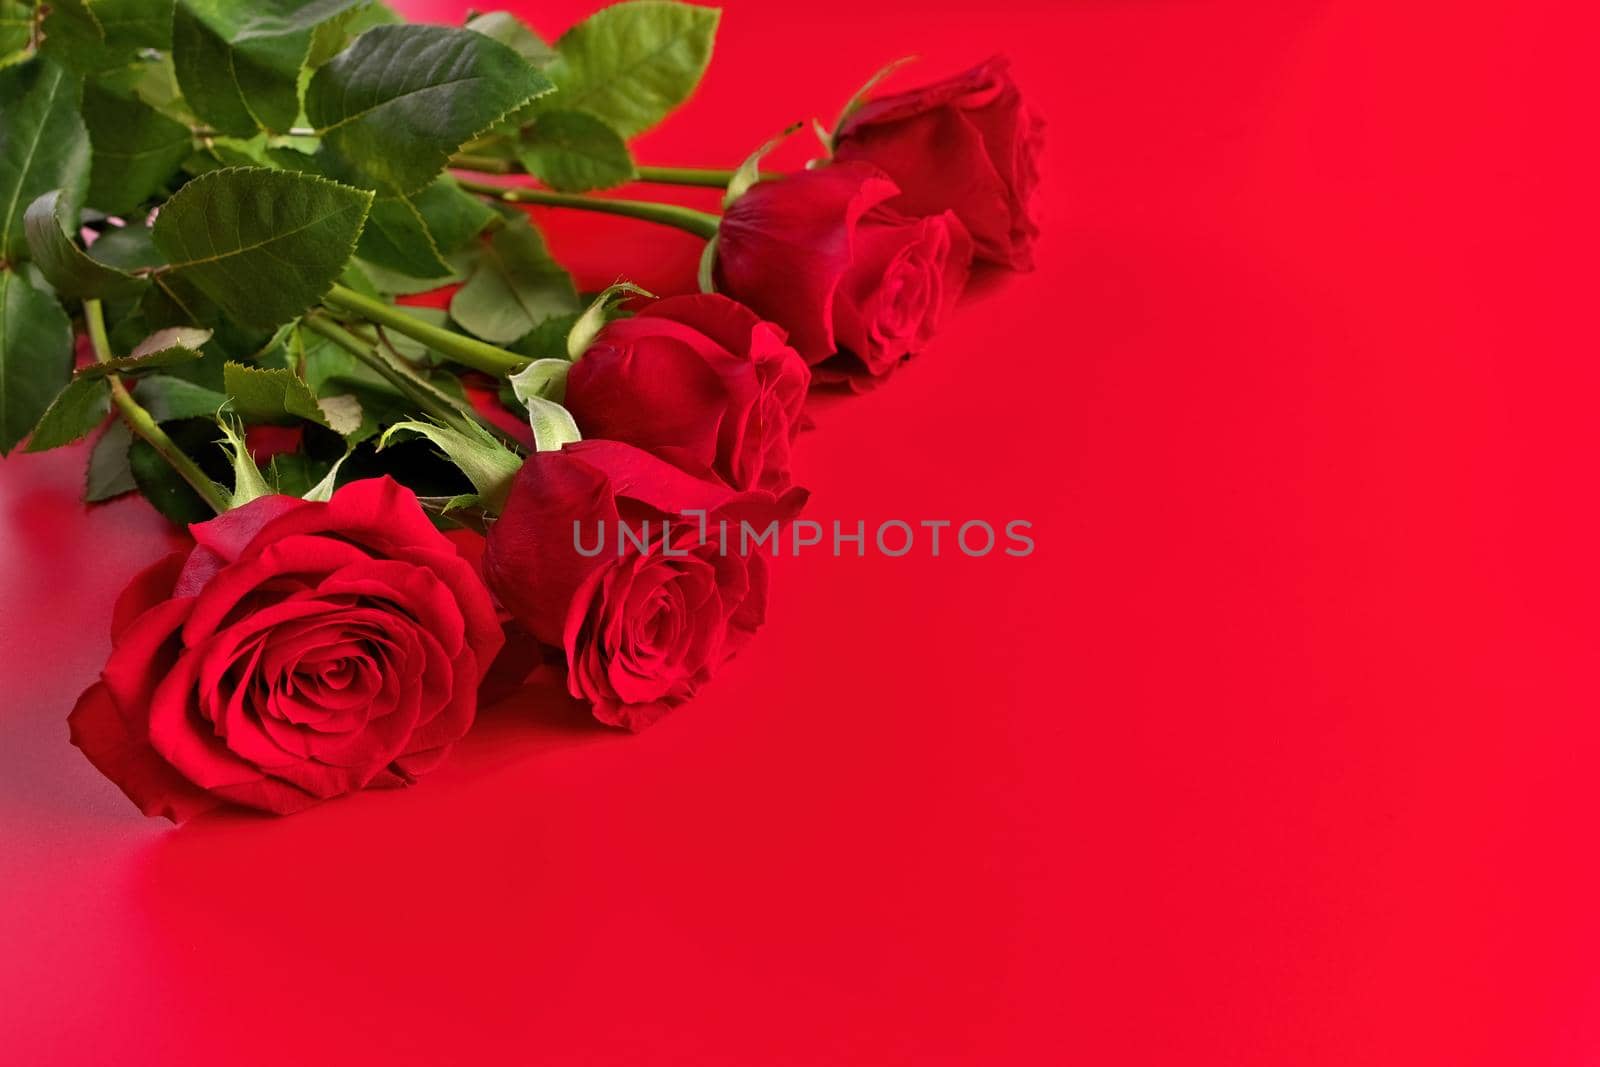 Low Angle View of Red Roses Bouquet on a Red Studio Background. Copy space right. by markvandam